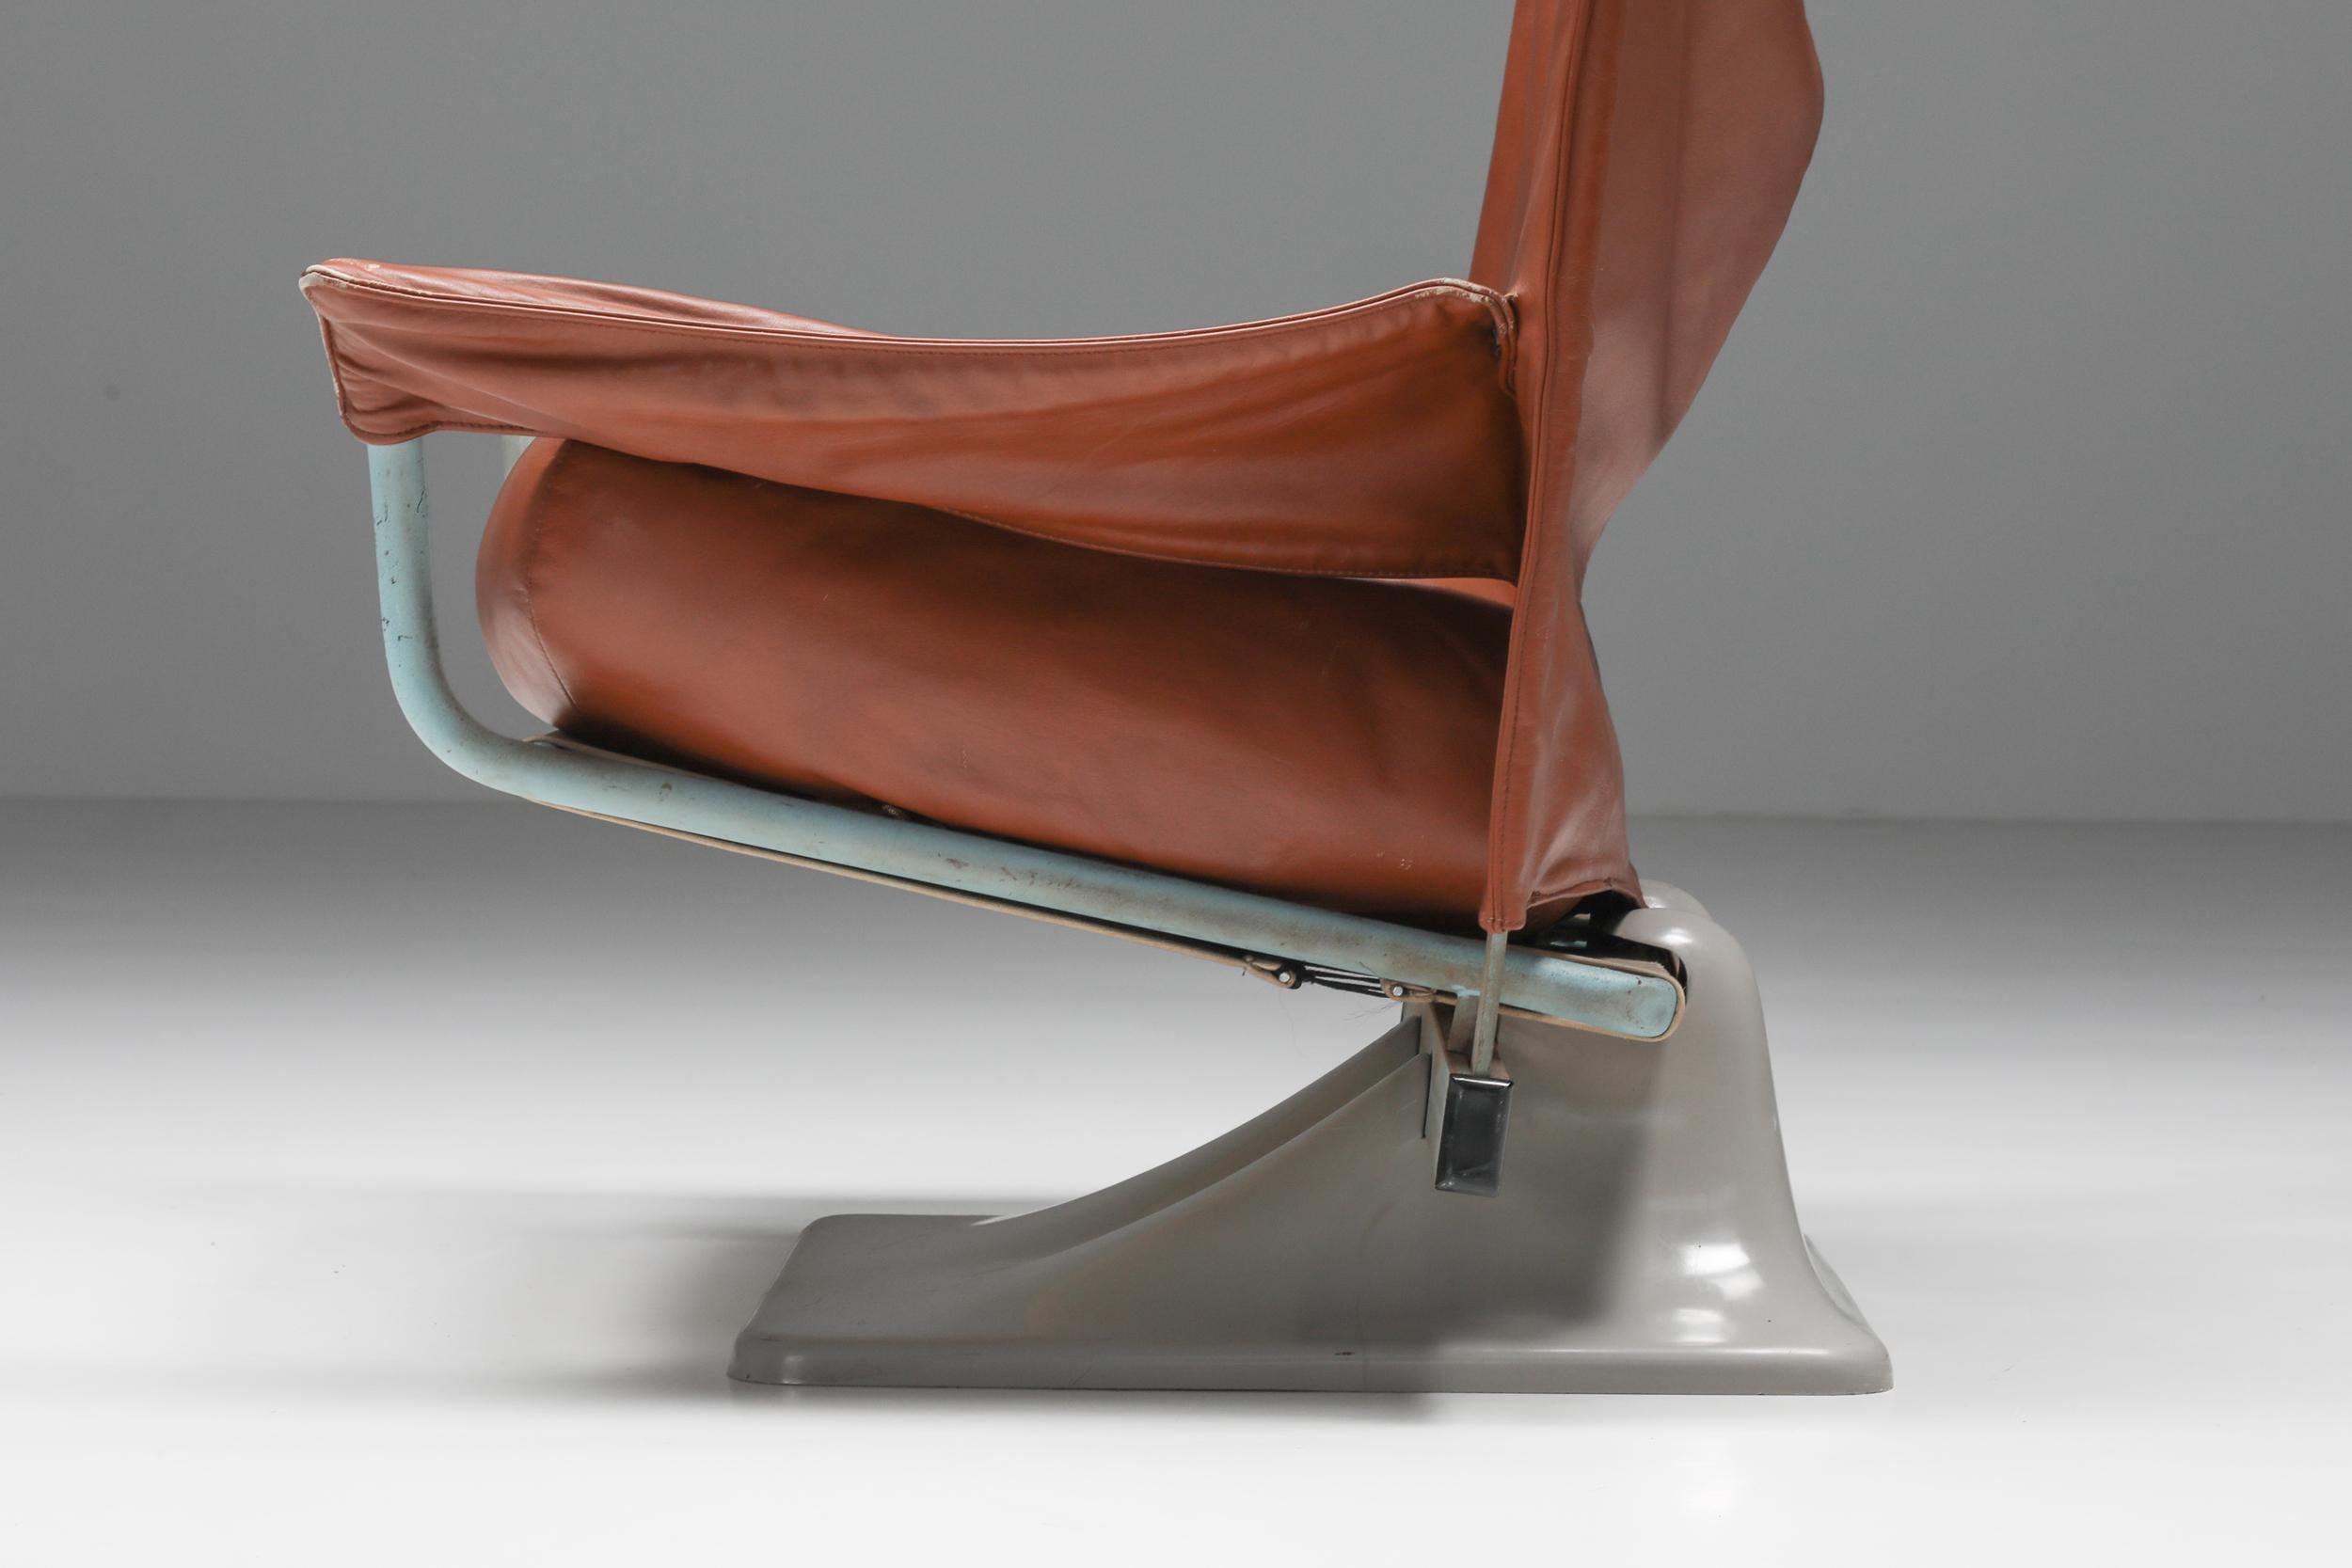 Steel Paolo Deganello 'Aeo' Chair for Archizoom Group, Cassina, 1973